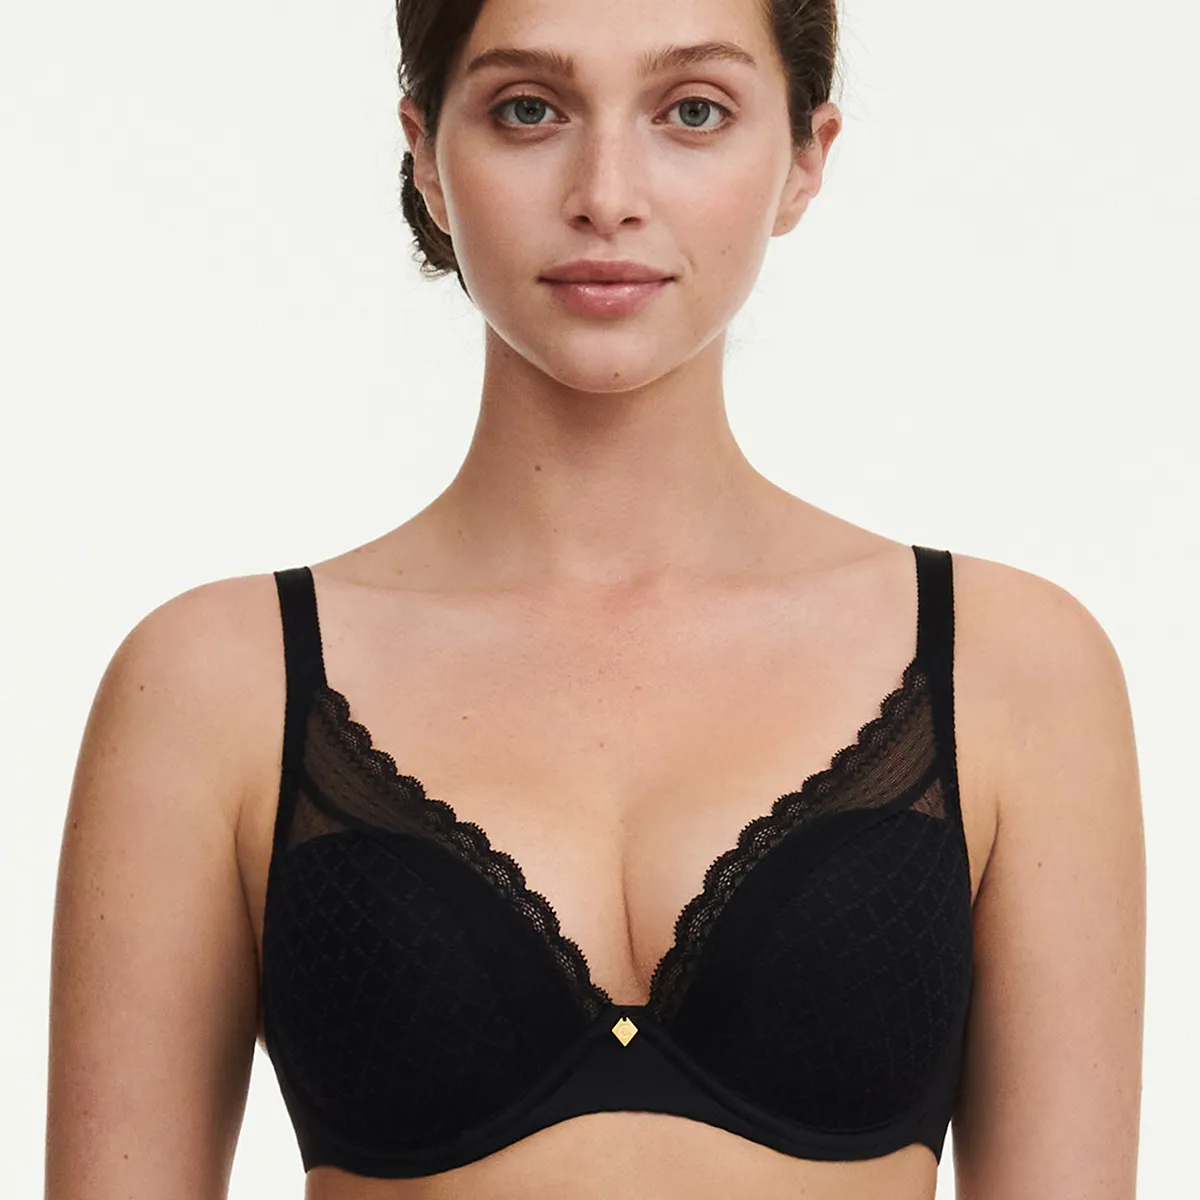 Triumph - Our Lace Spotlight bra is always a treat! With its ultra